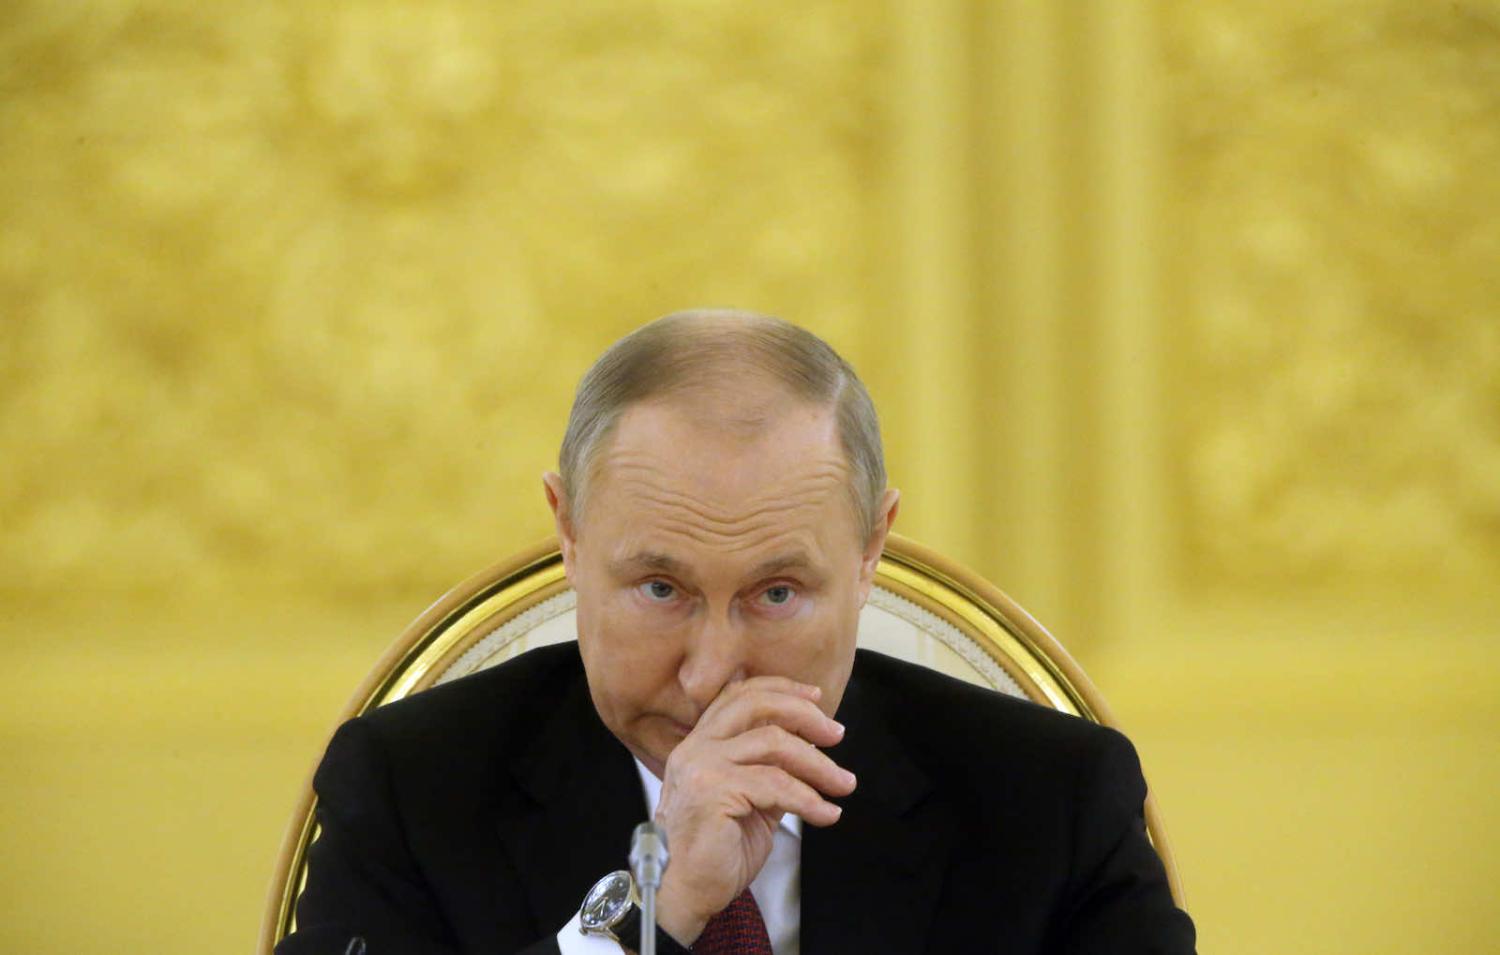 Even if illness is a poor explanation for the errors Vladimir Putin has committed to date, it may inform the future (Getty Images)